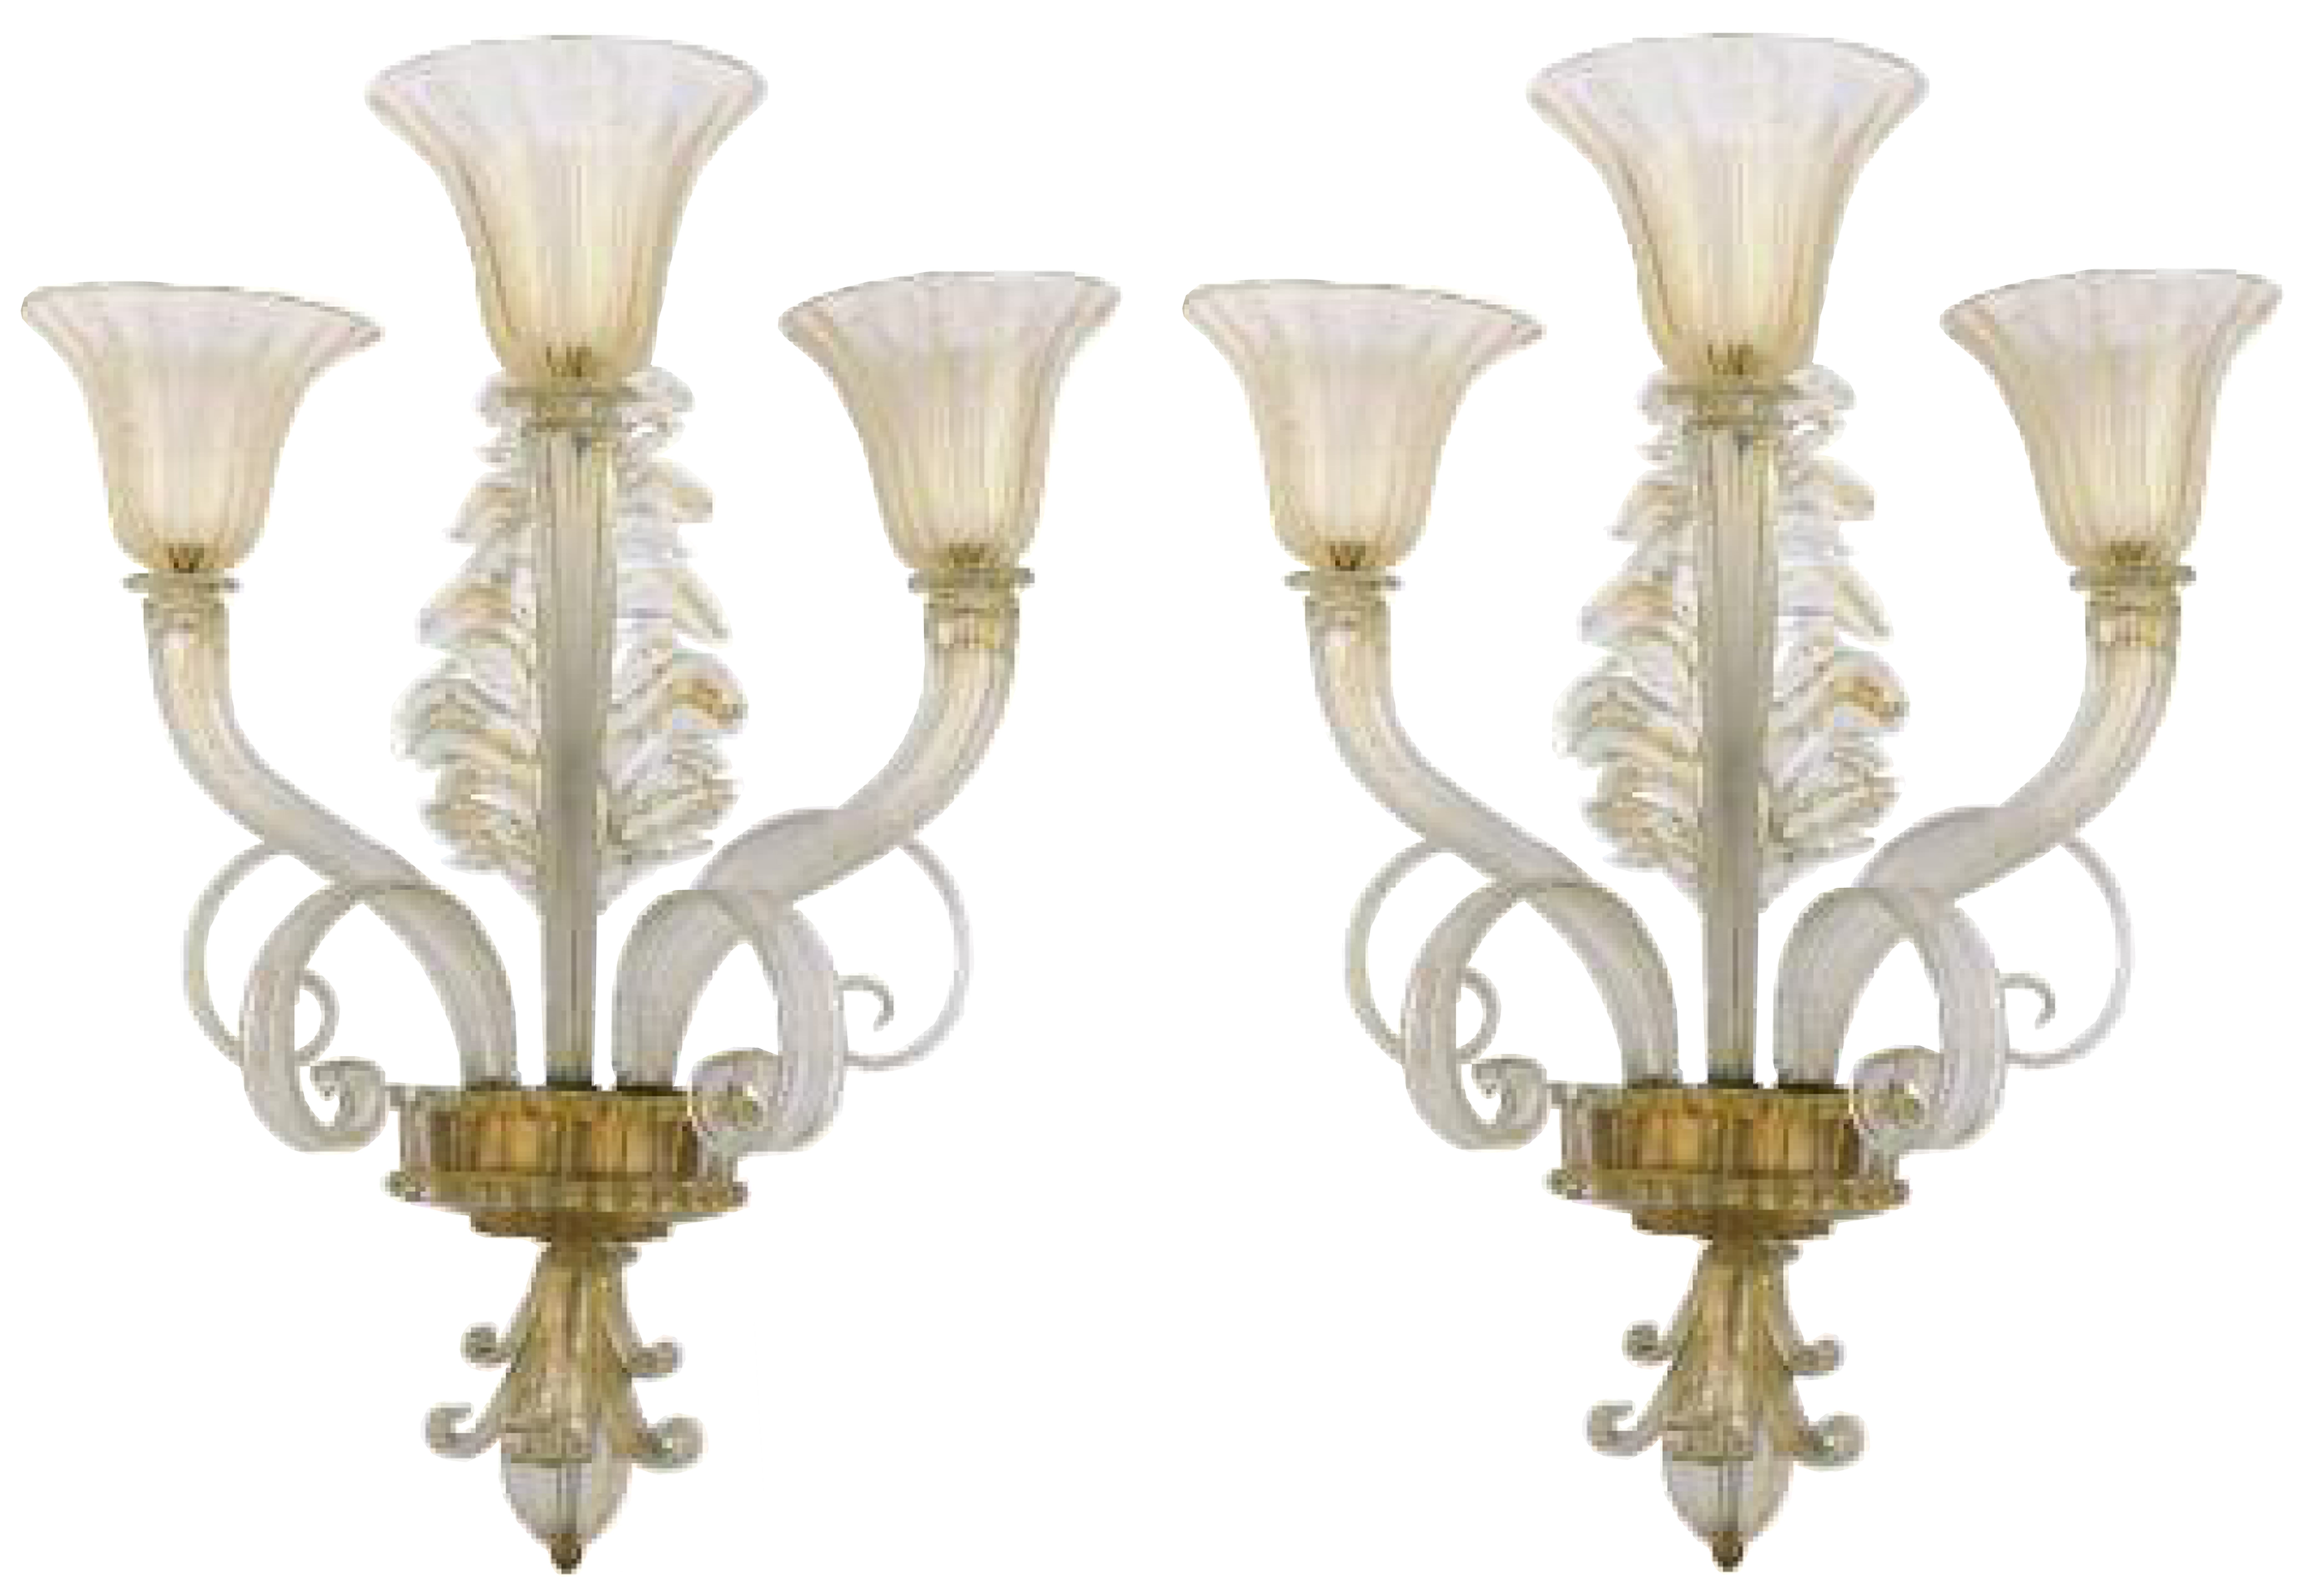 Pair of Ercole Barovier Three-Arm Glass Sconces For Sale